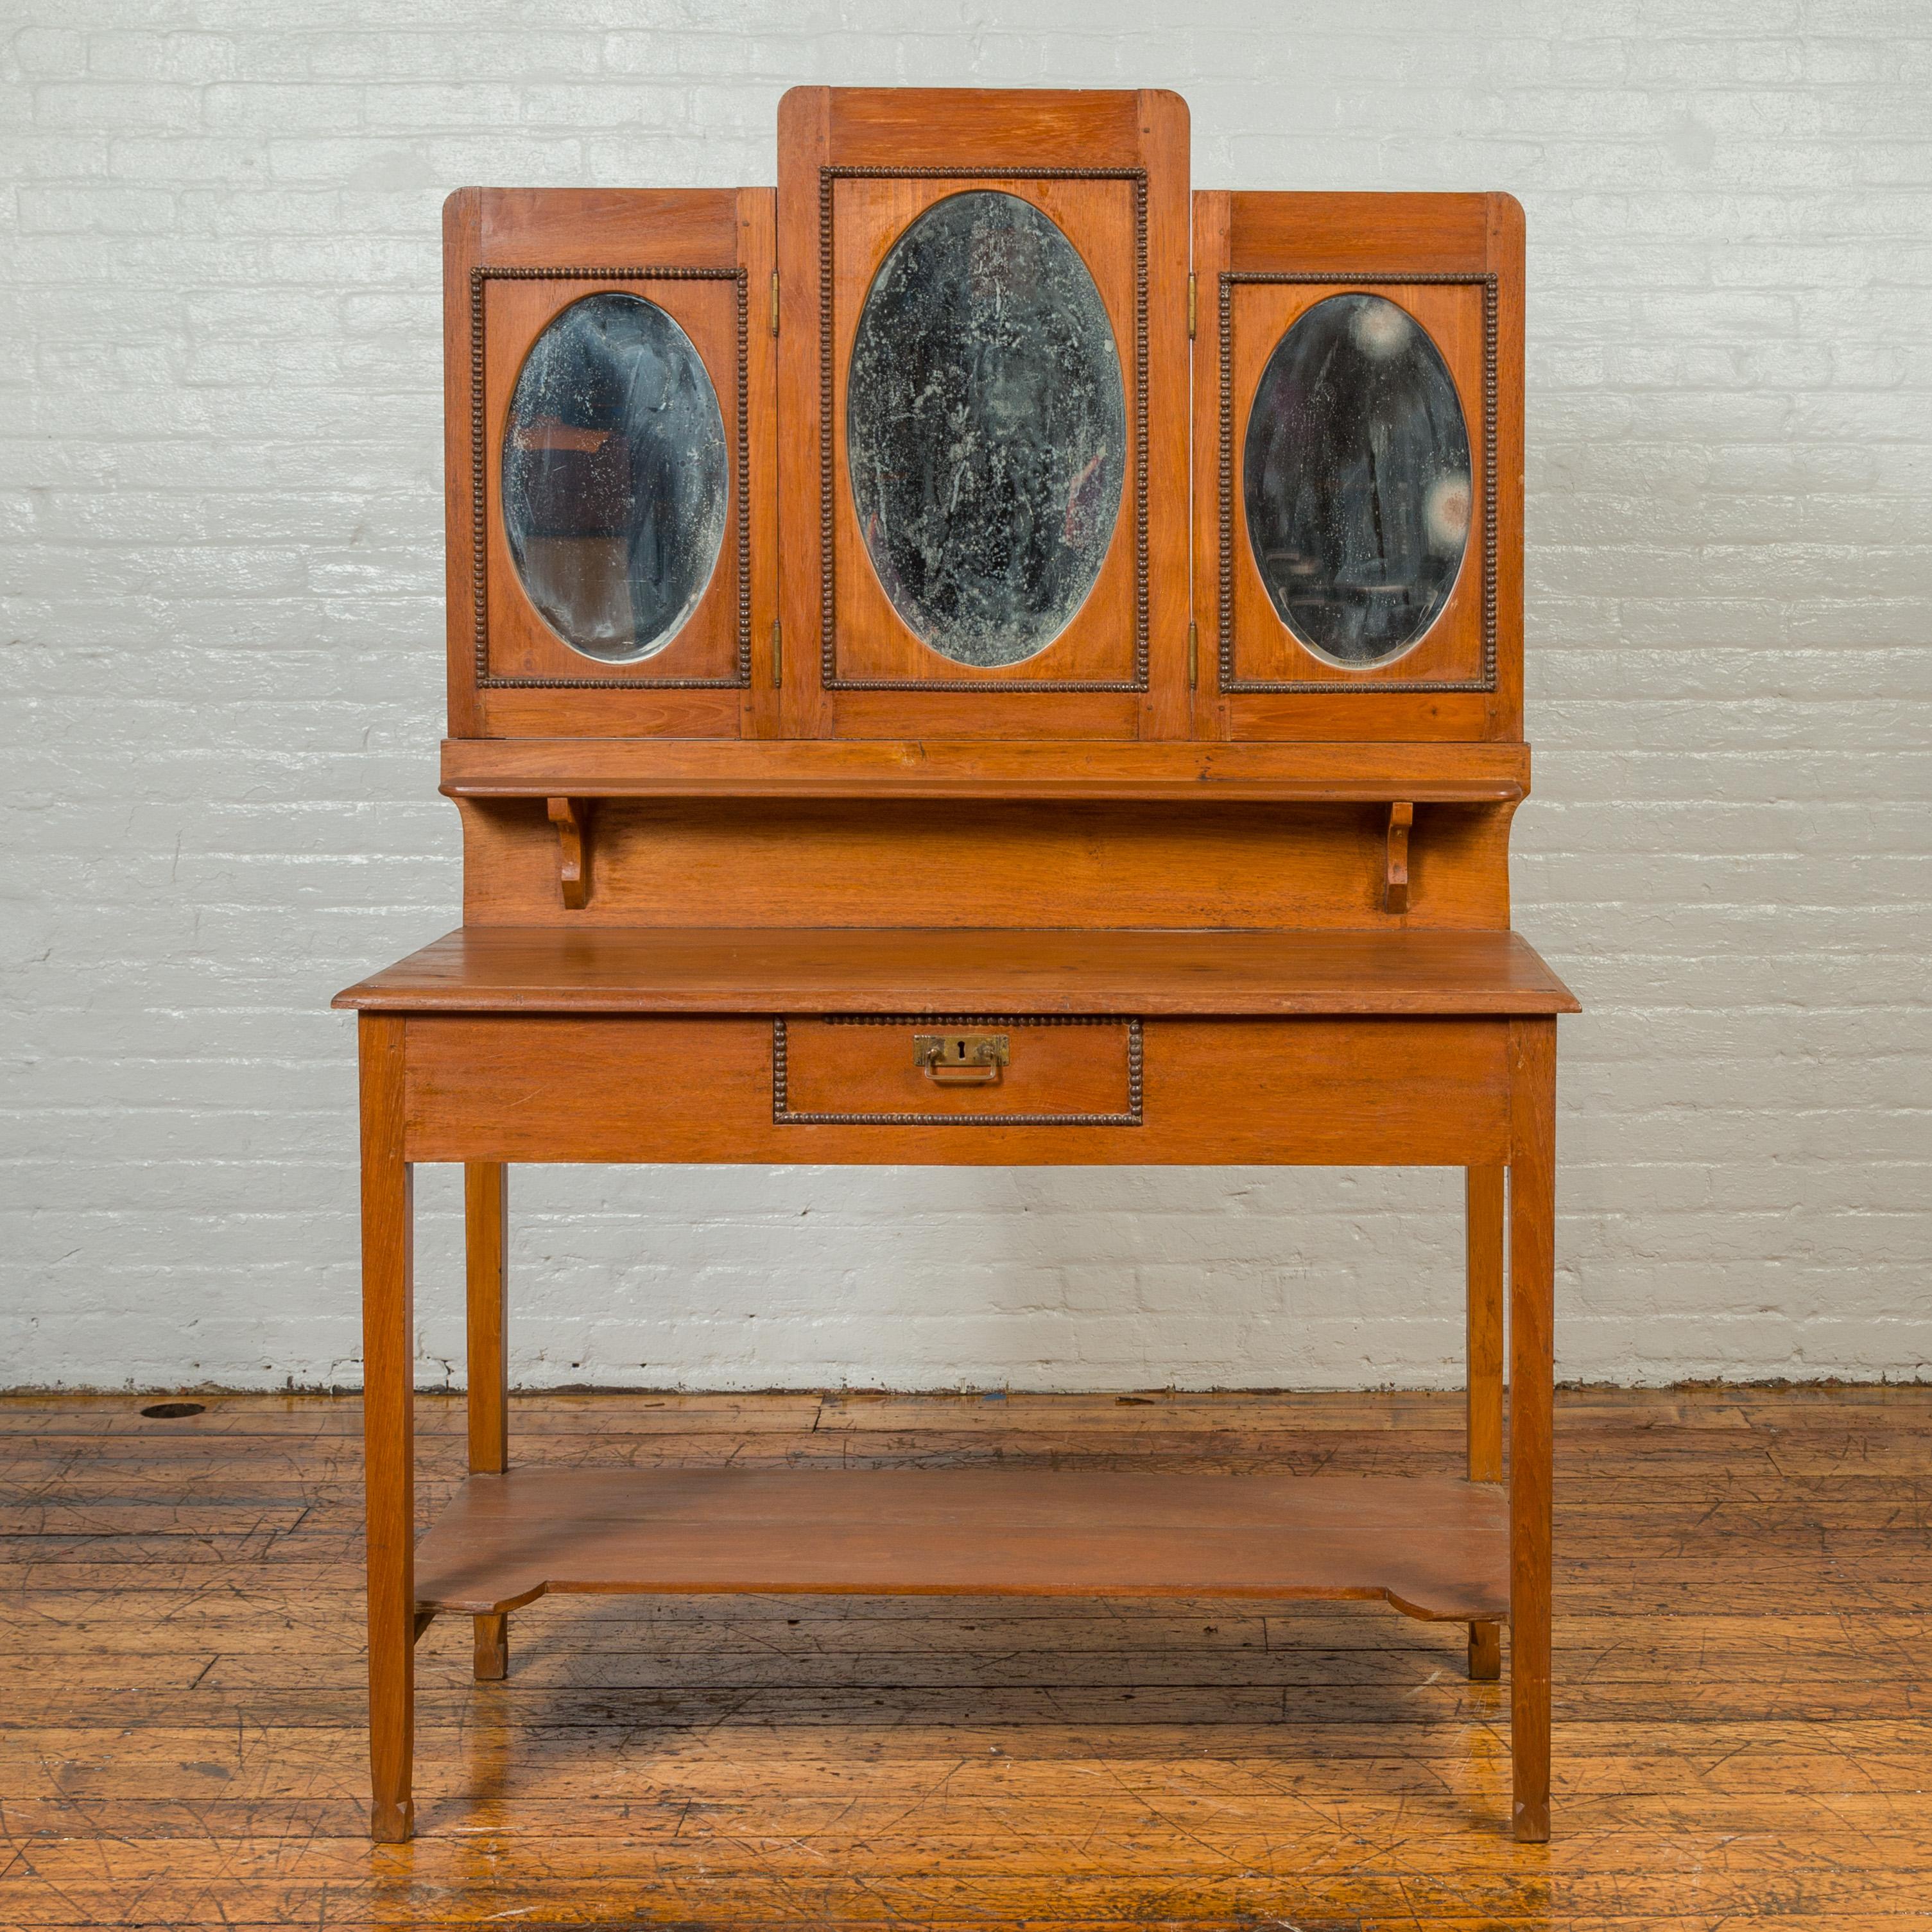 A vintage Indonesian woman's vanity from the mid-20th century, with oval glass panels, single drawer and lower shelf. Crafted during the midcentury period, this wooden vanity features a central door panel flanked with folding ones, smaller in size.